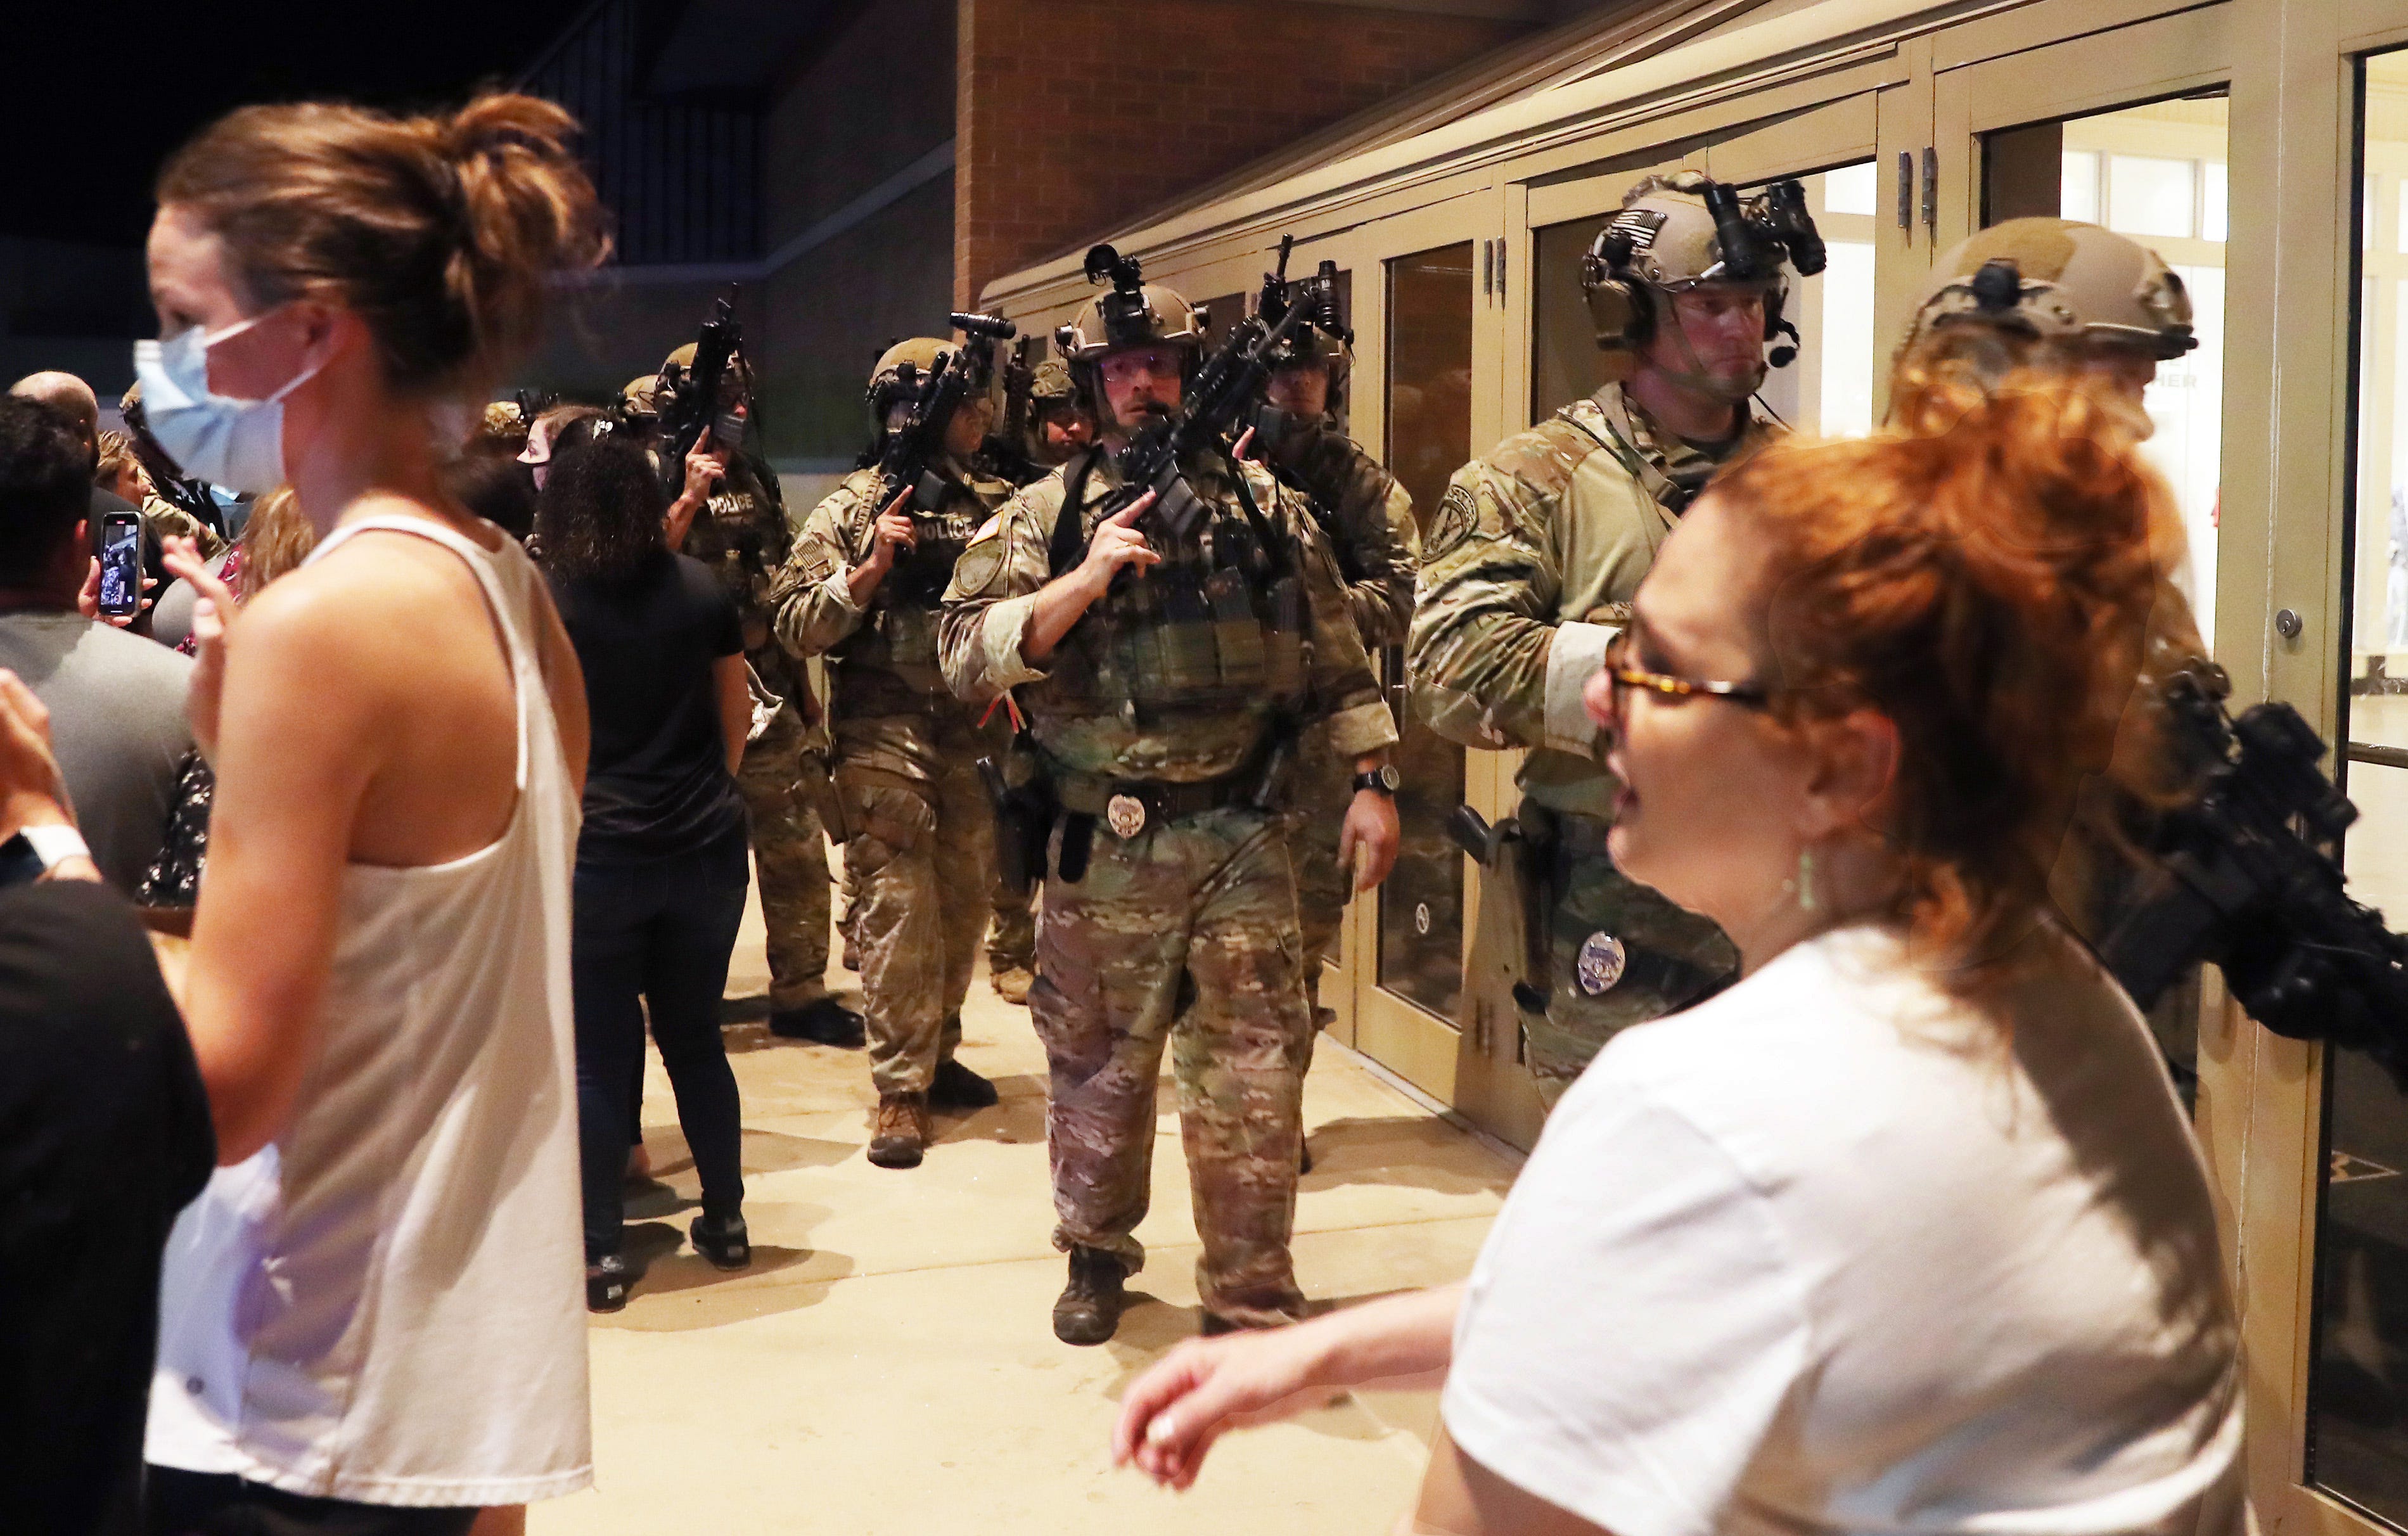 Mall customers run out as heavily armed SWAT Team members enter the Danbury Mall after reports of shots fired in the mall Aug. 11, 2021